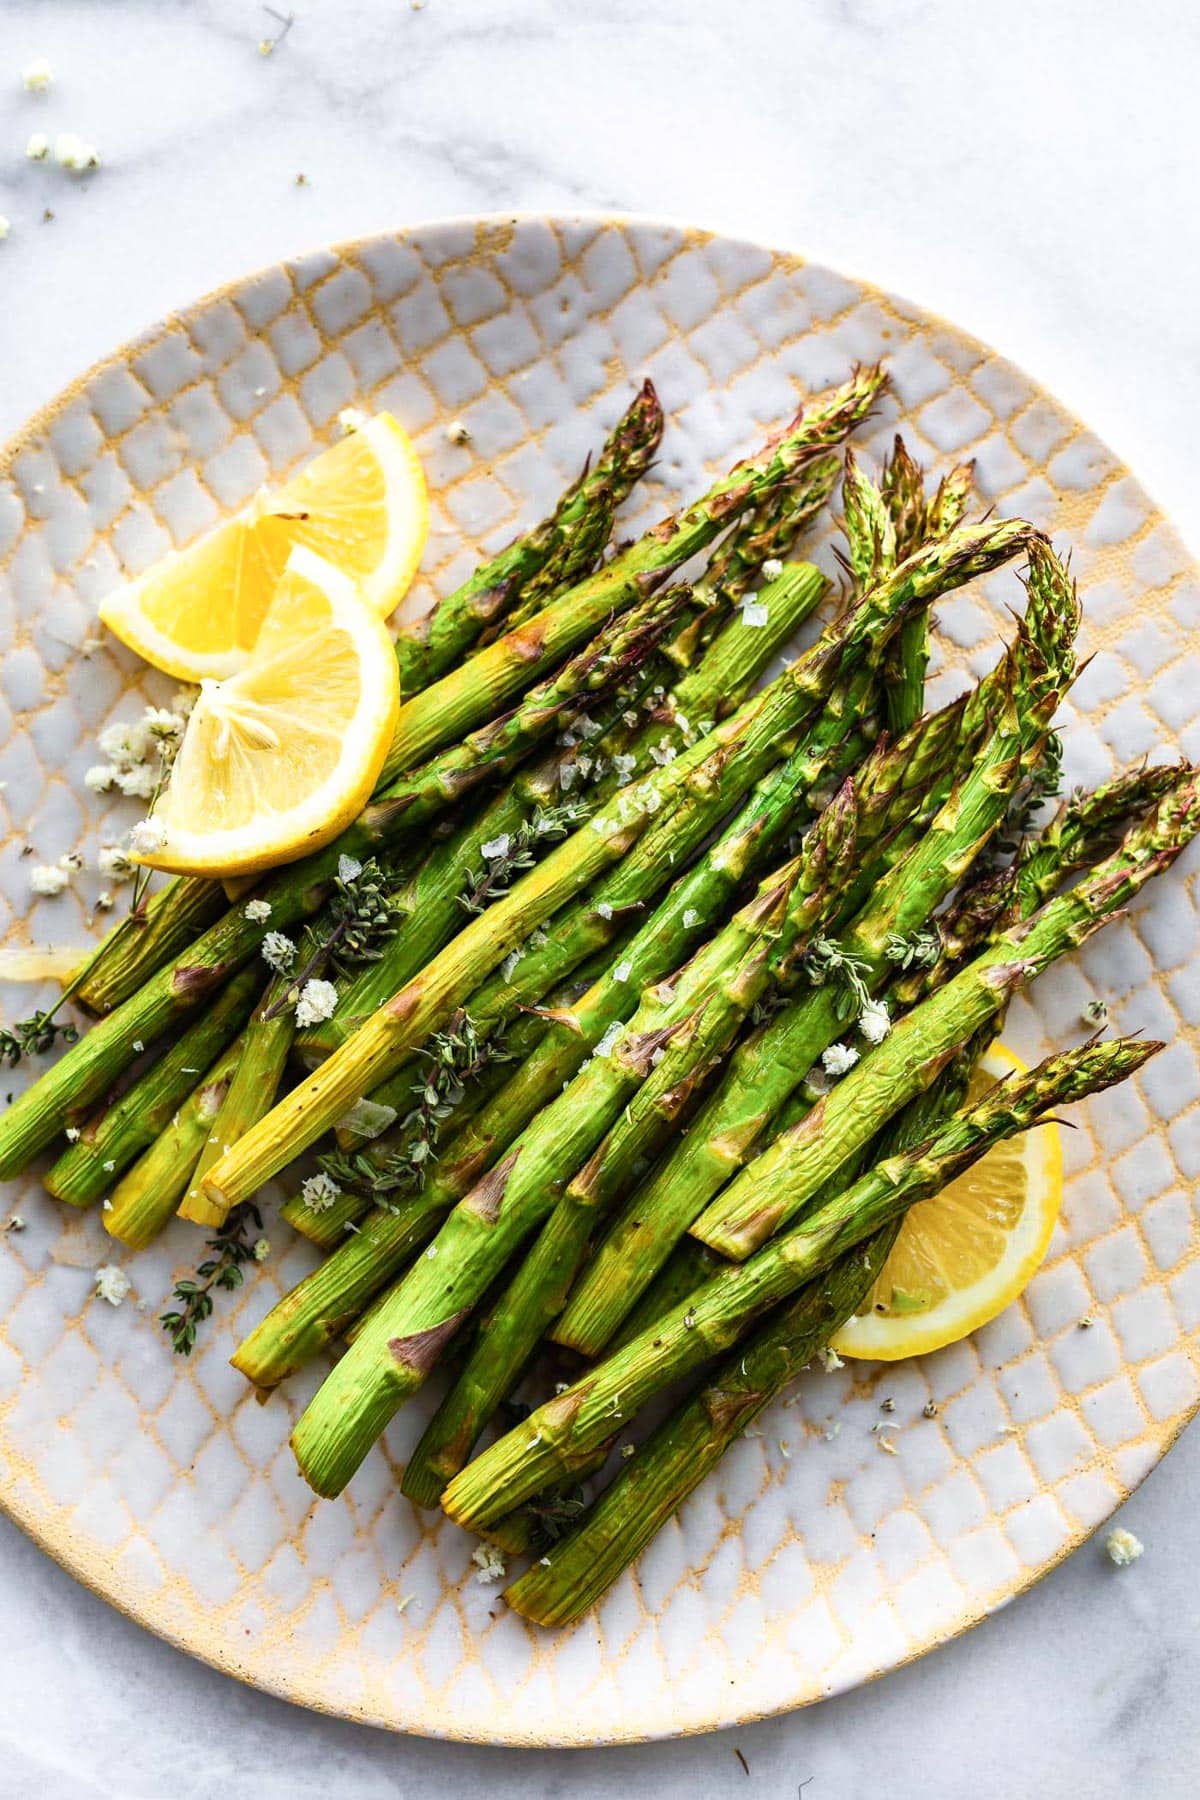 A plate full of air fried asparagus spears with lemon wedges on the side.